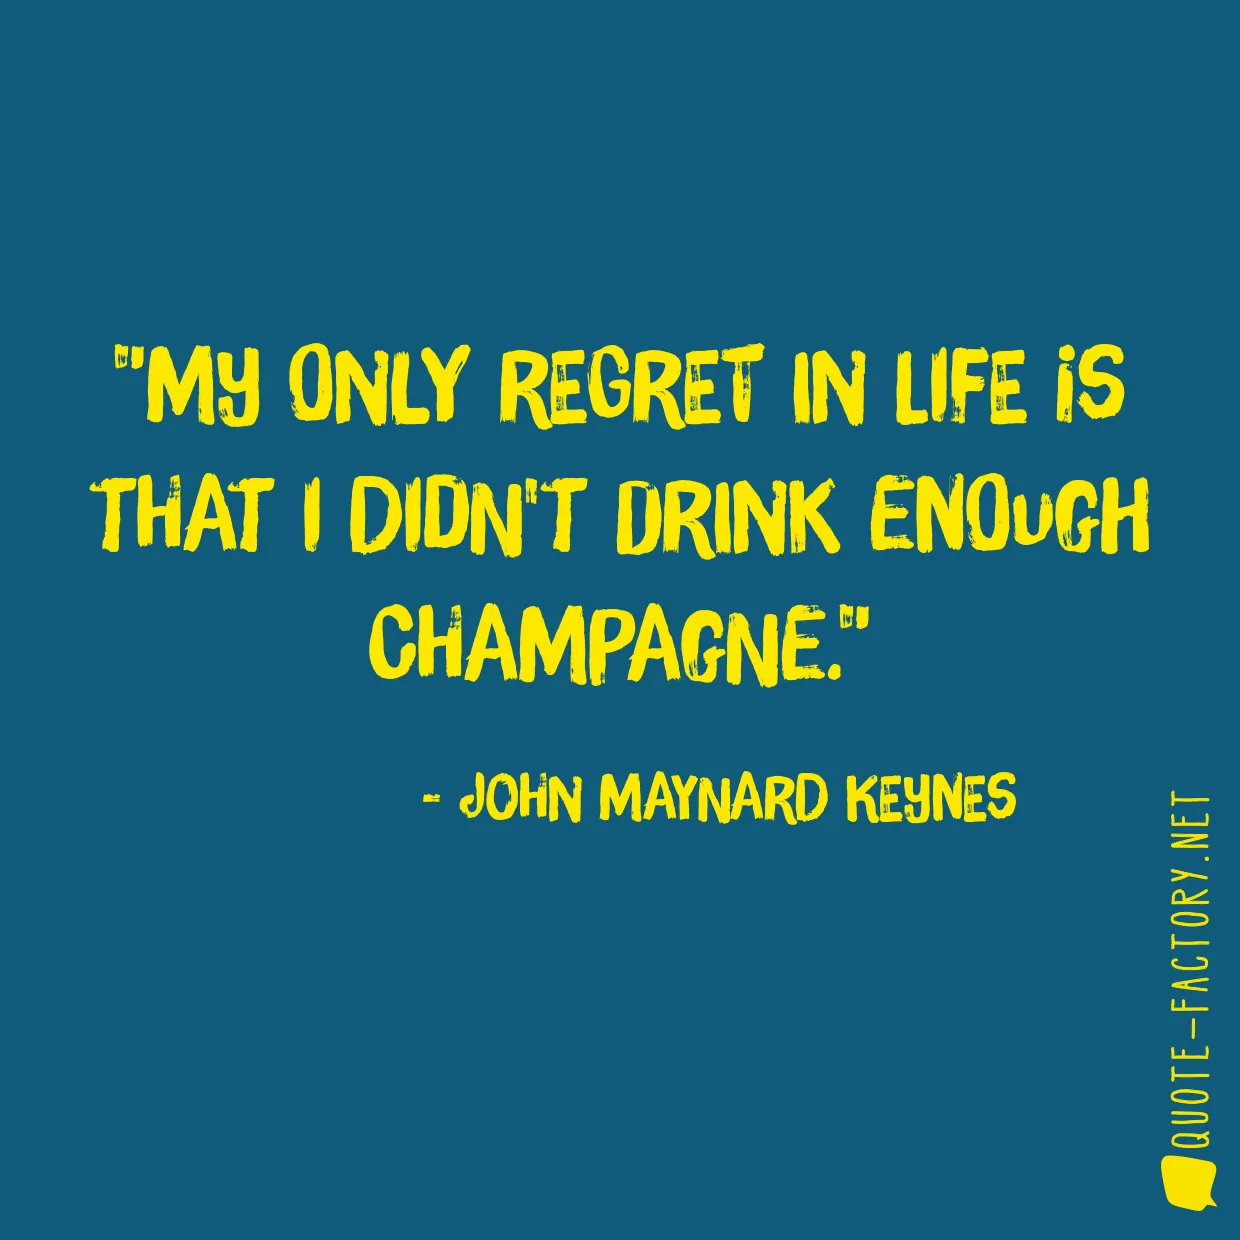 My only regret in life is that I didn't drink enough Champagne.